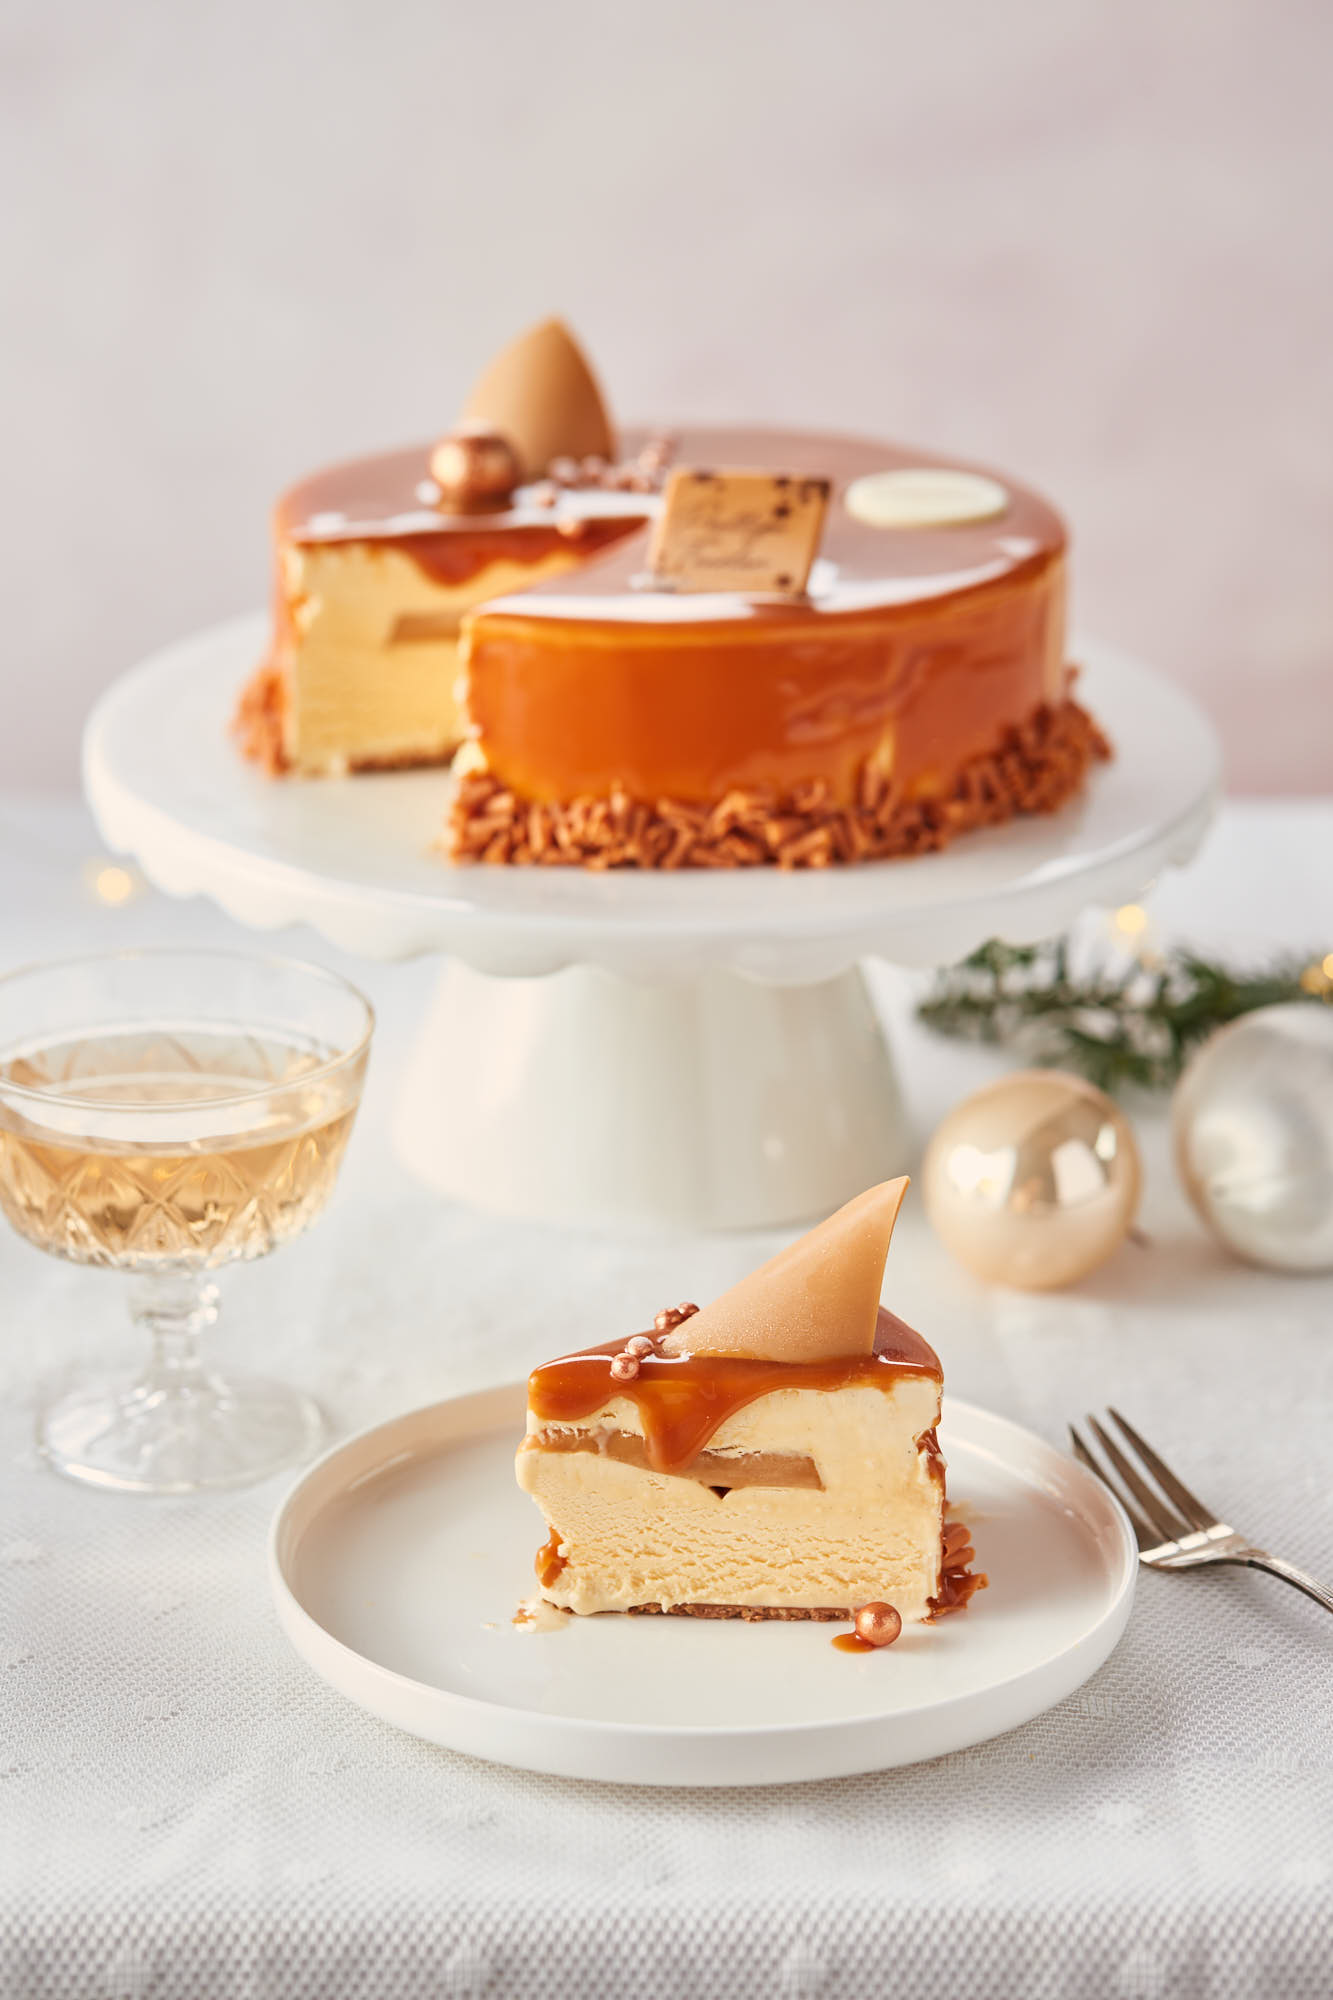 Ice Cream Cake With Caramel In A Festive Setting